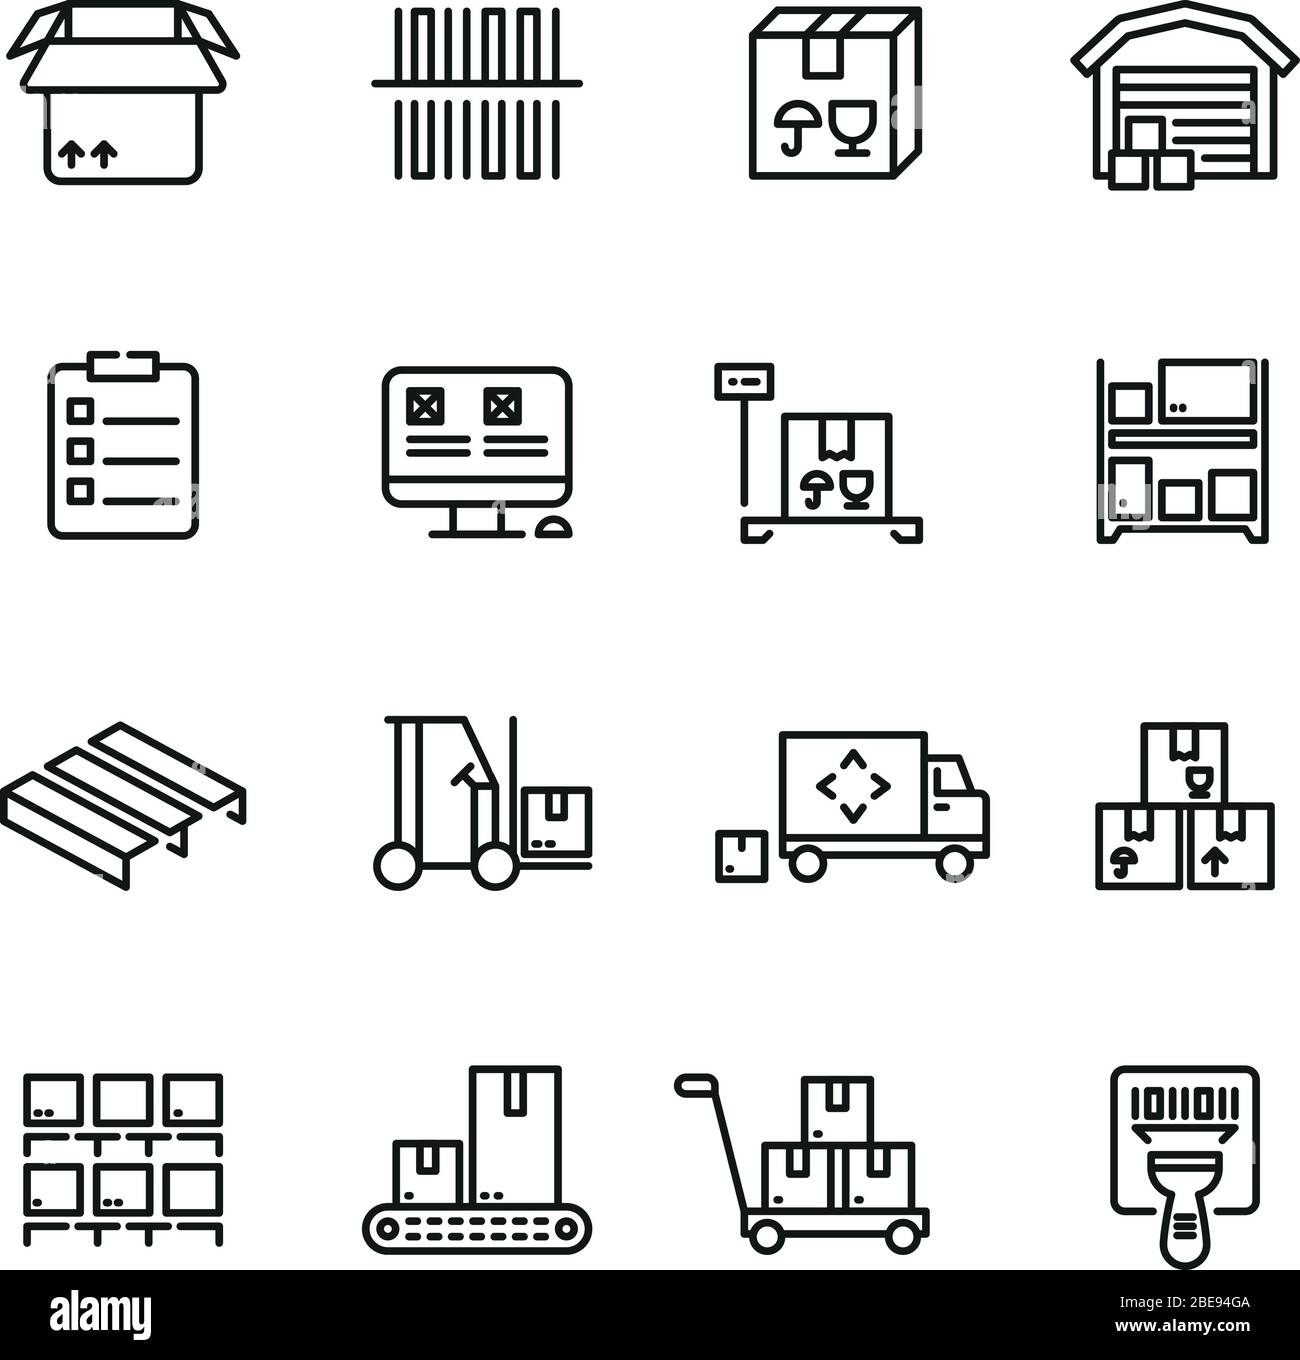 Storage service, warehouse, package delivery and equipment vector line icons. Freight and package, cargo container storage illustration Stock Vector